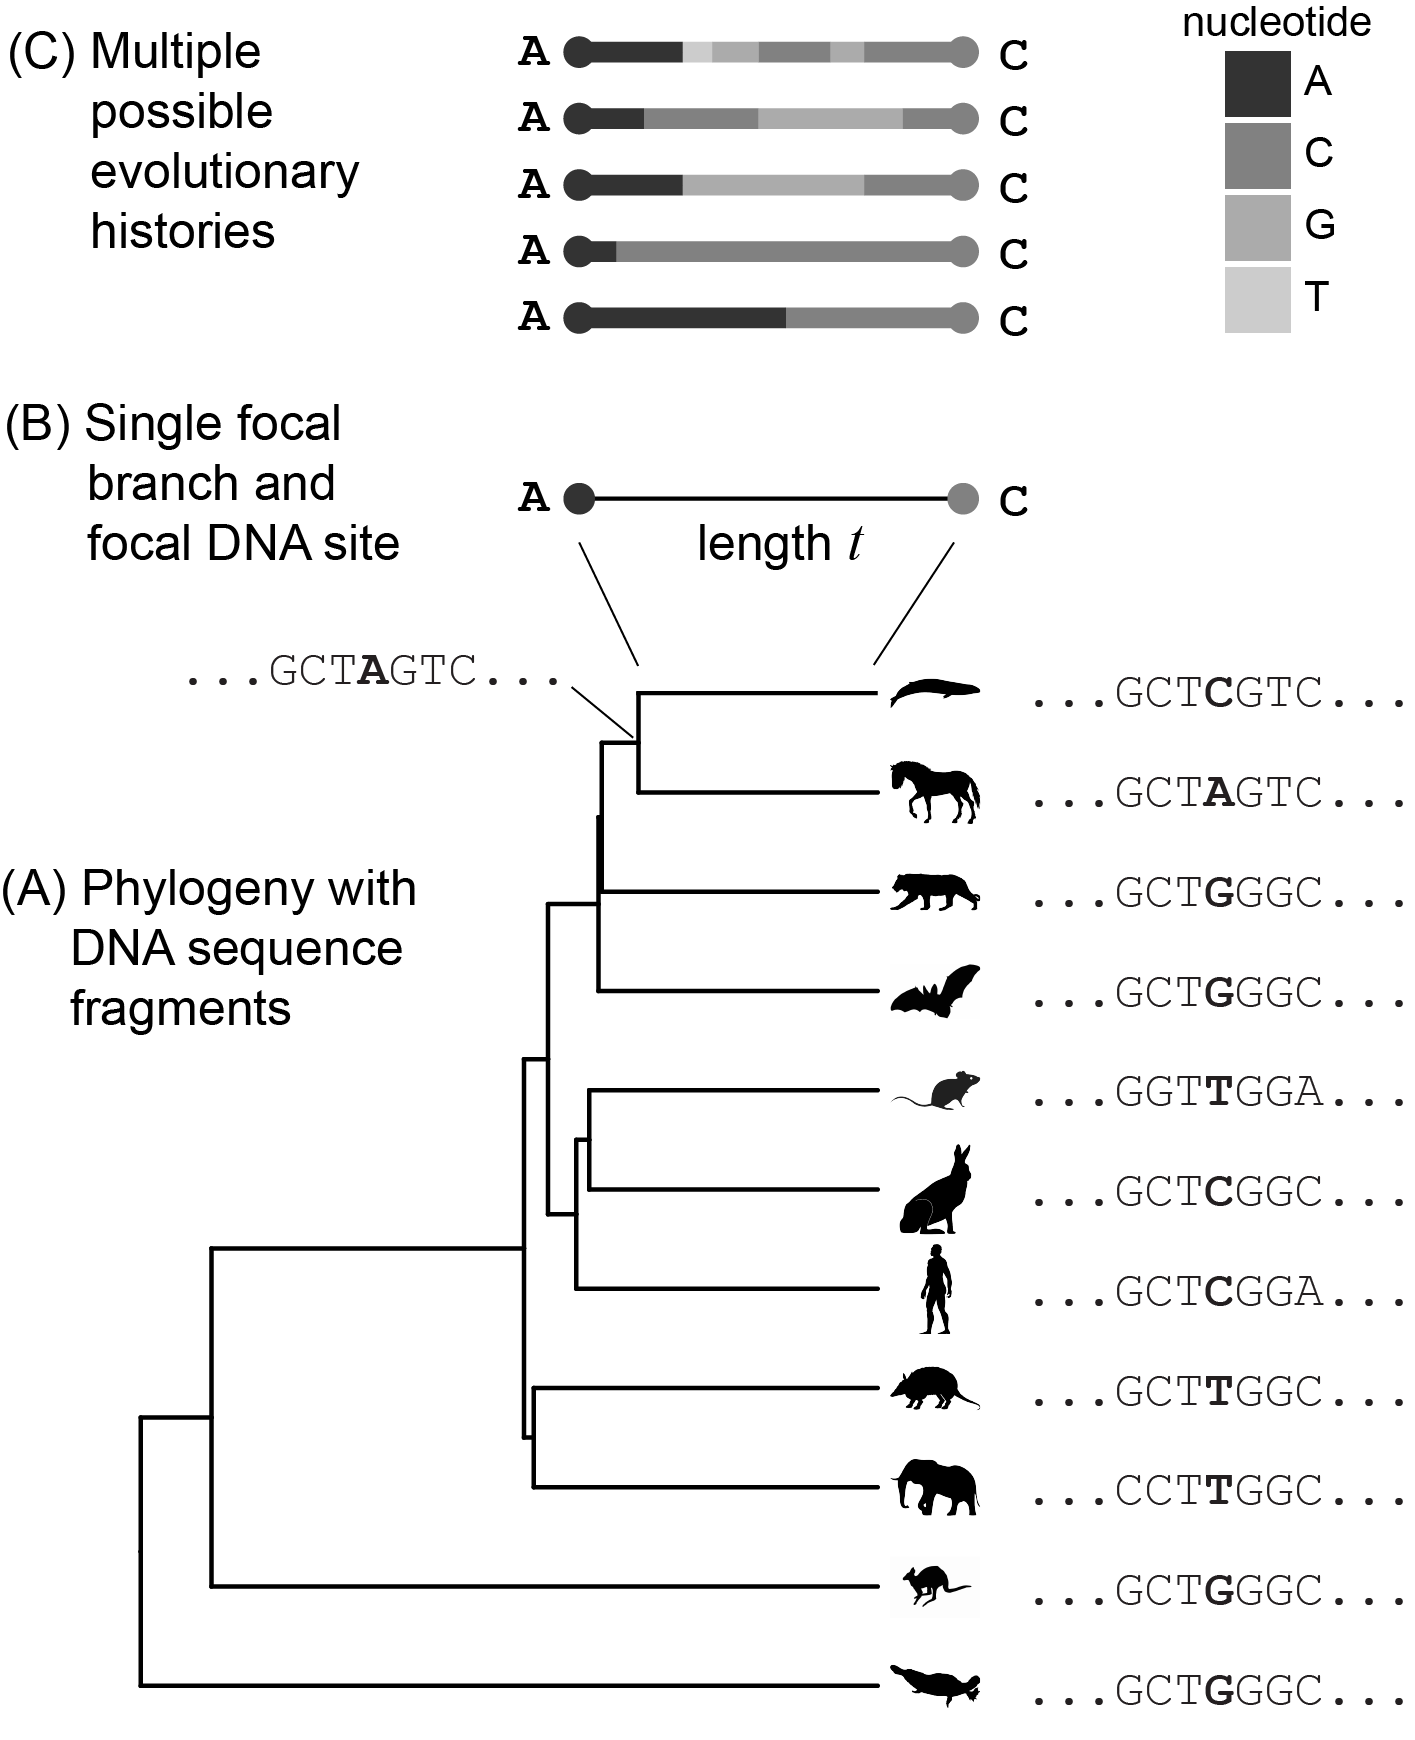 Our current goal is to model the evolution of a single site in a DNA sequence along a single branch in a phylogeny. (A) An example phylogeny, with DNA sequence fragments shown at the tips and one internal node. The site under examination is in color, and the branch under examination (at the top) is thicker than the rest. (B) A closeup of the focal branch, and the state of the focal site at its ends (the parent and child nodes). (C) Multiple mutational histories that are consistent with the starting and end states shown in (B), *i.e.* a cange from A to C.